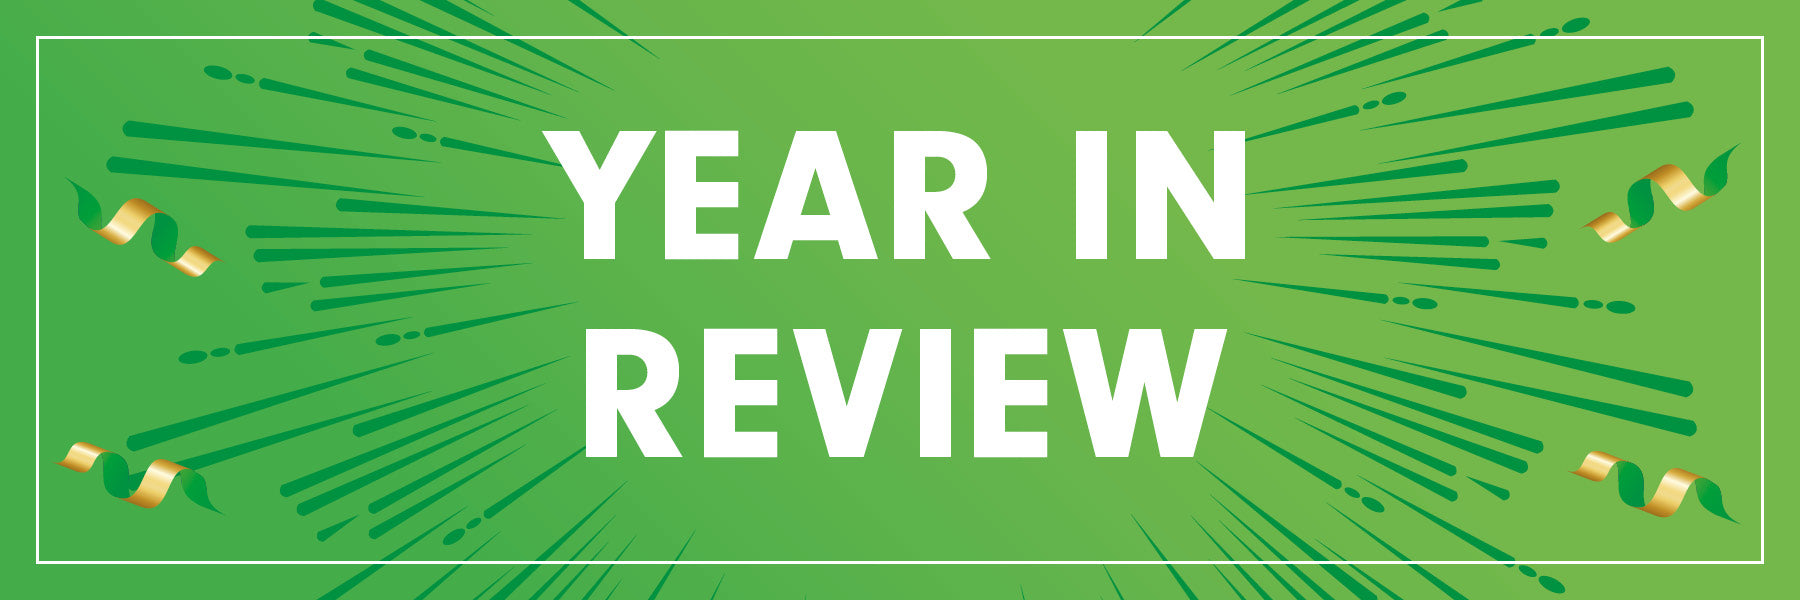 "Year In Review" On a green background with confetti